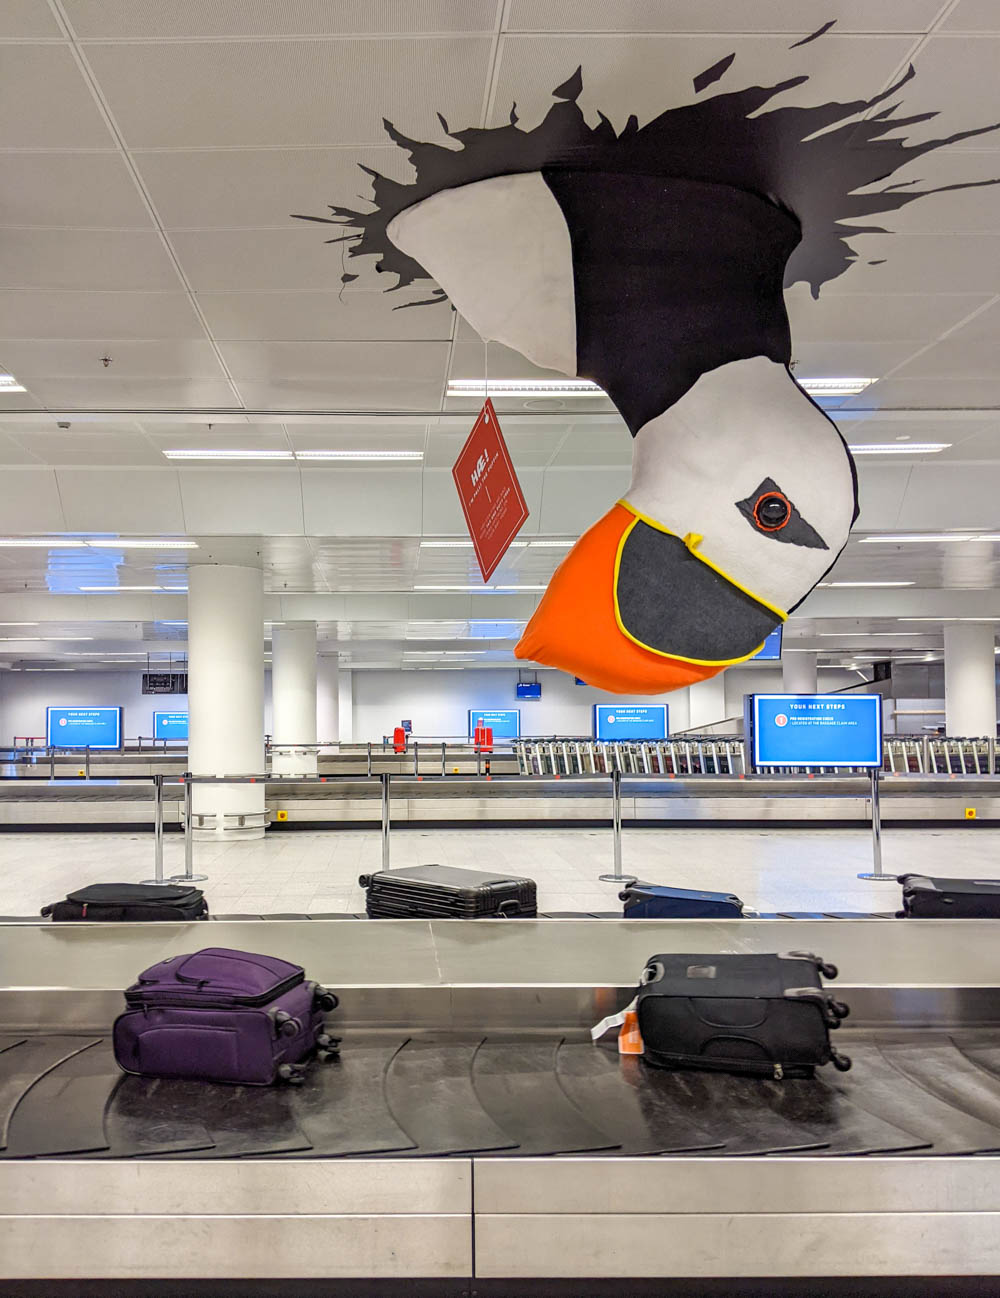 giant puffin popping out of the ceiling above baggage claim area